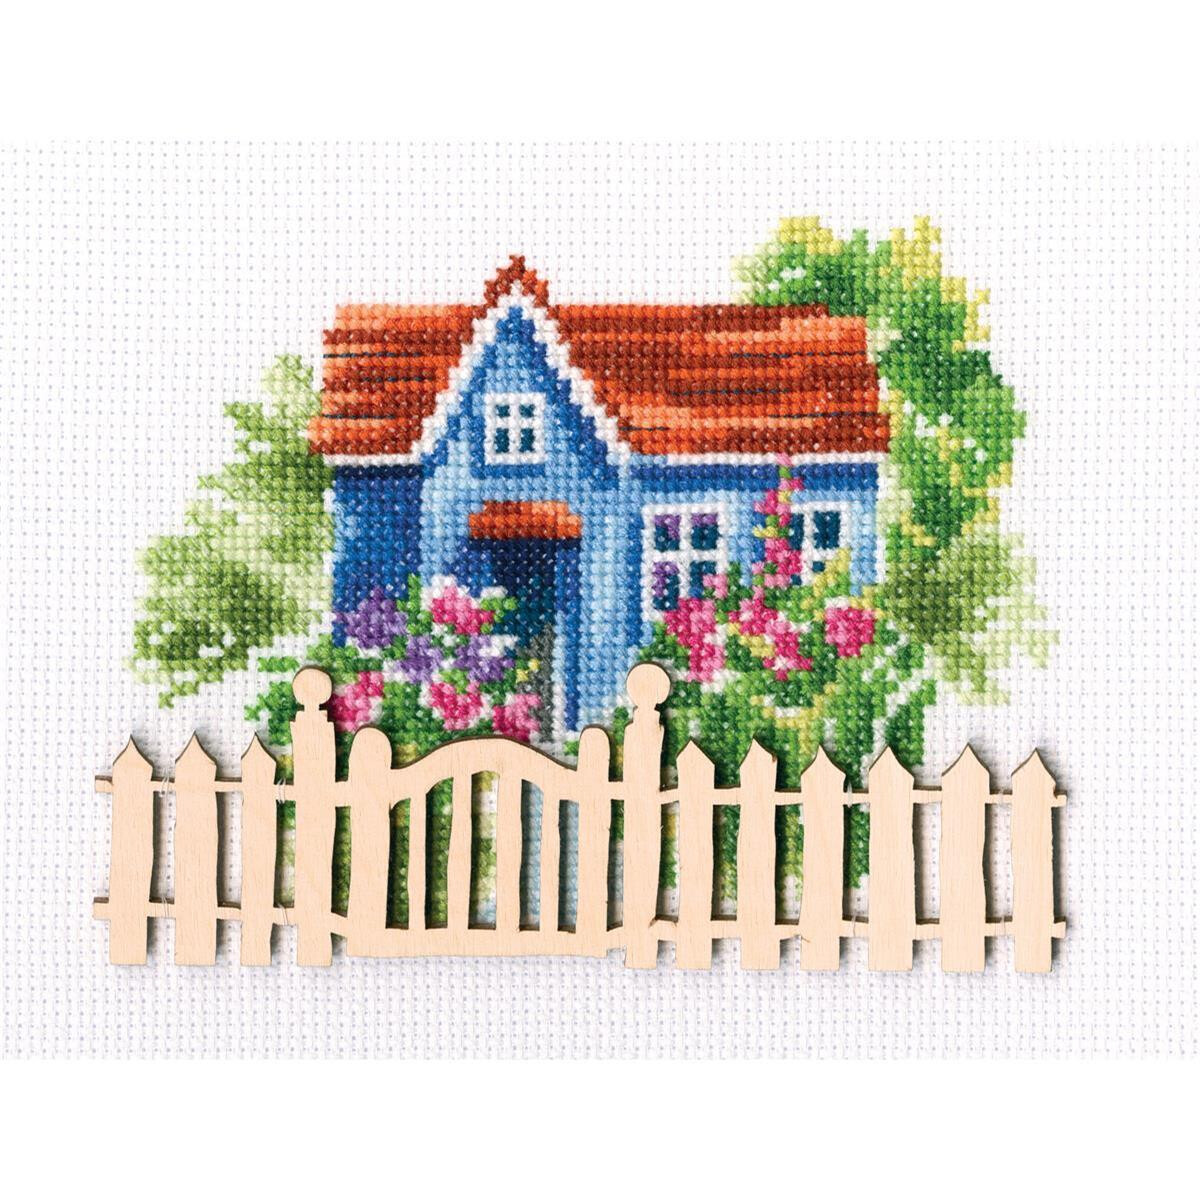 RTO counted Cross Stitch Kit with plywood form "My...